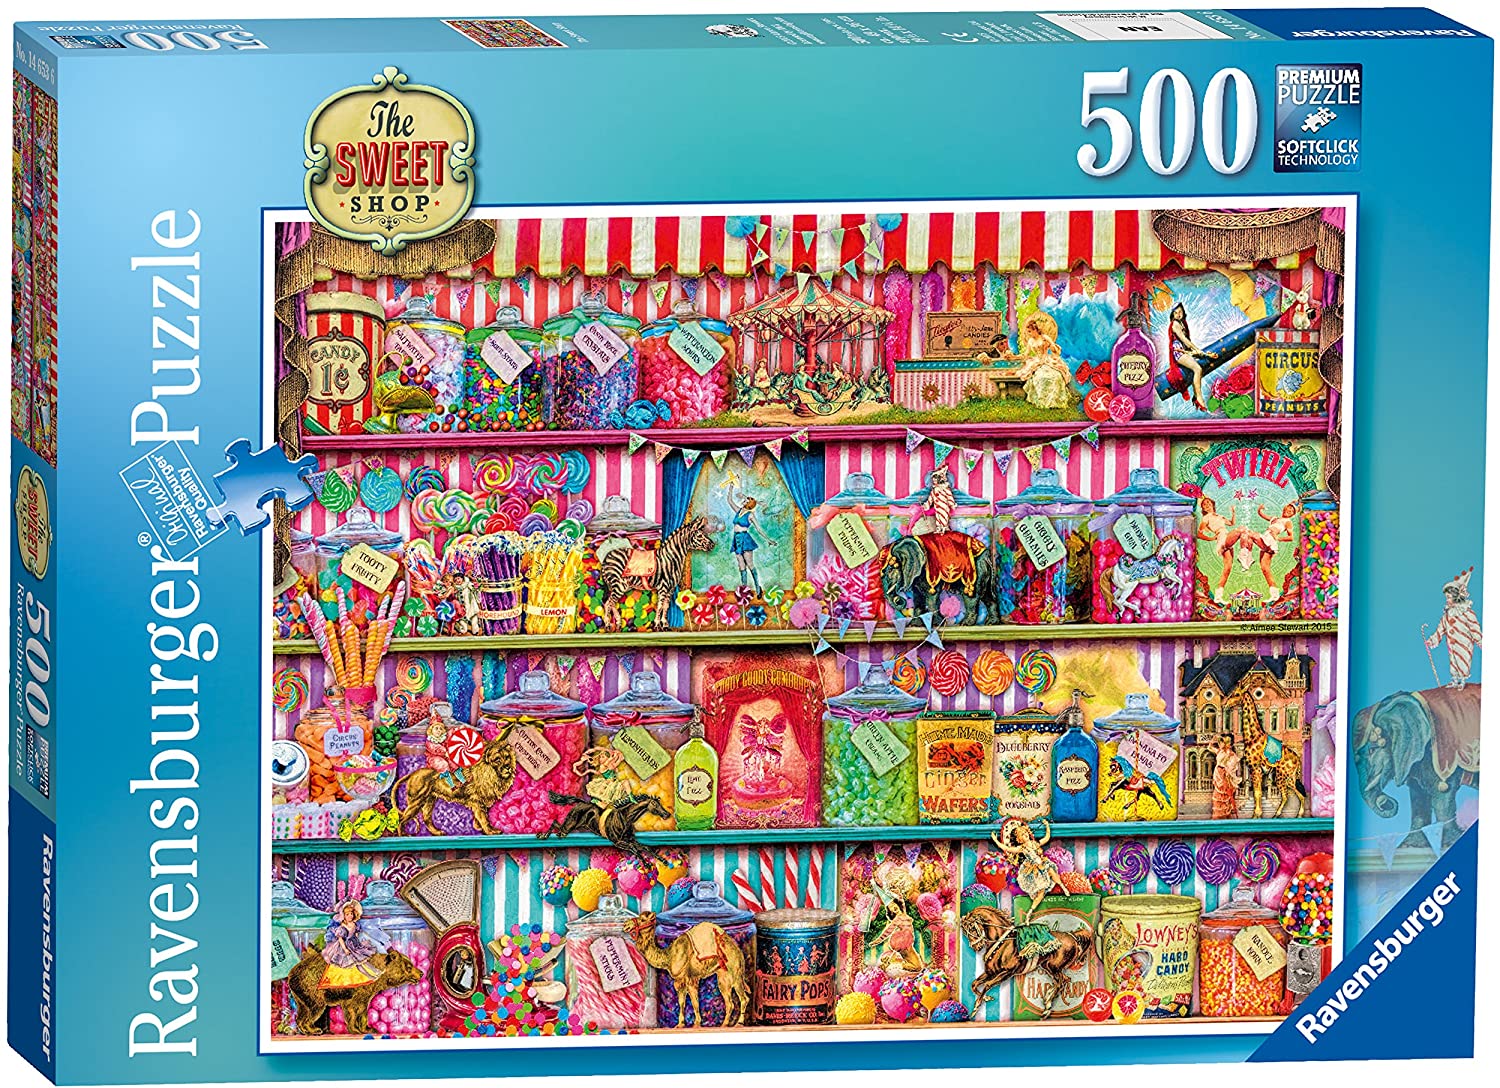 aimee stewart rare the sweet shop OVP Ravensburger puzzle 500 pièces NEUF 